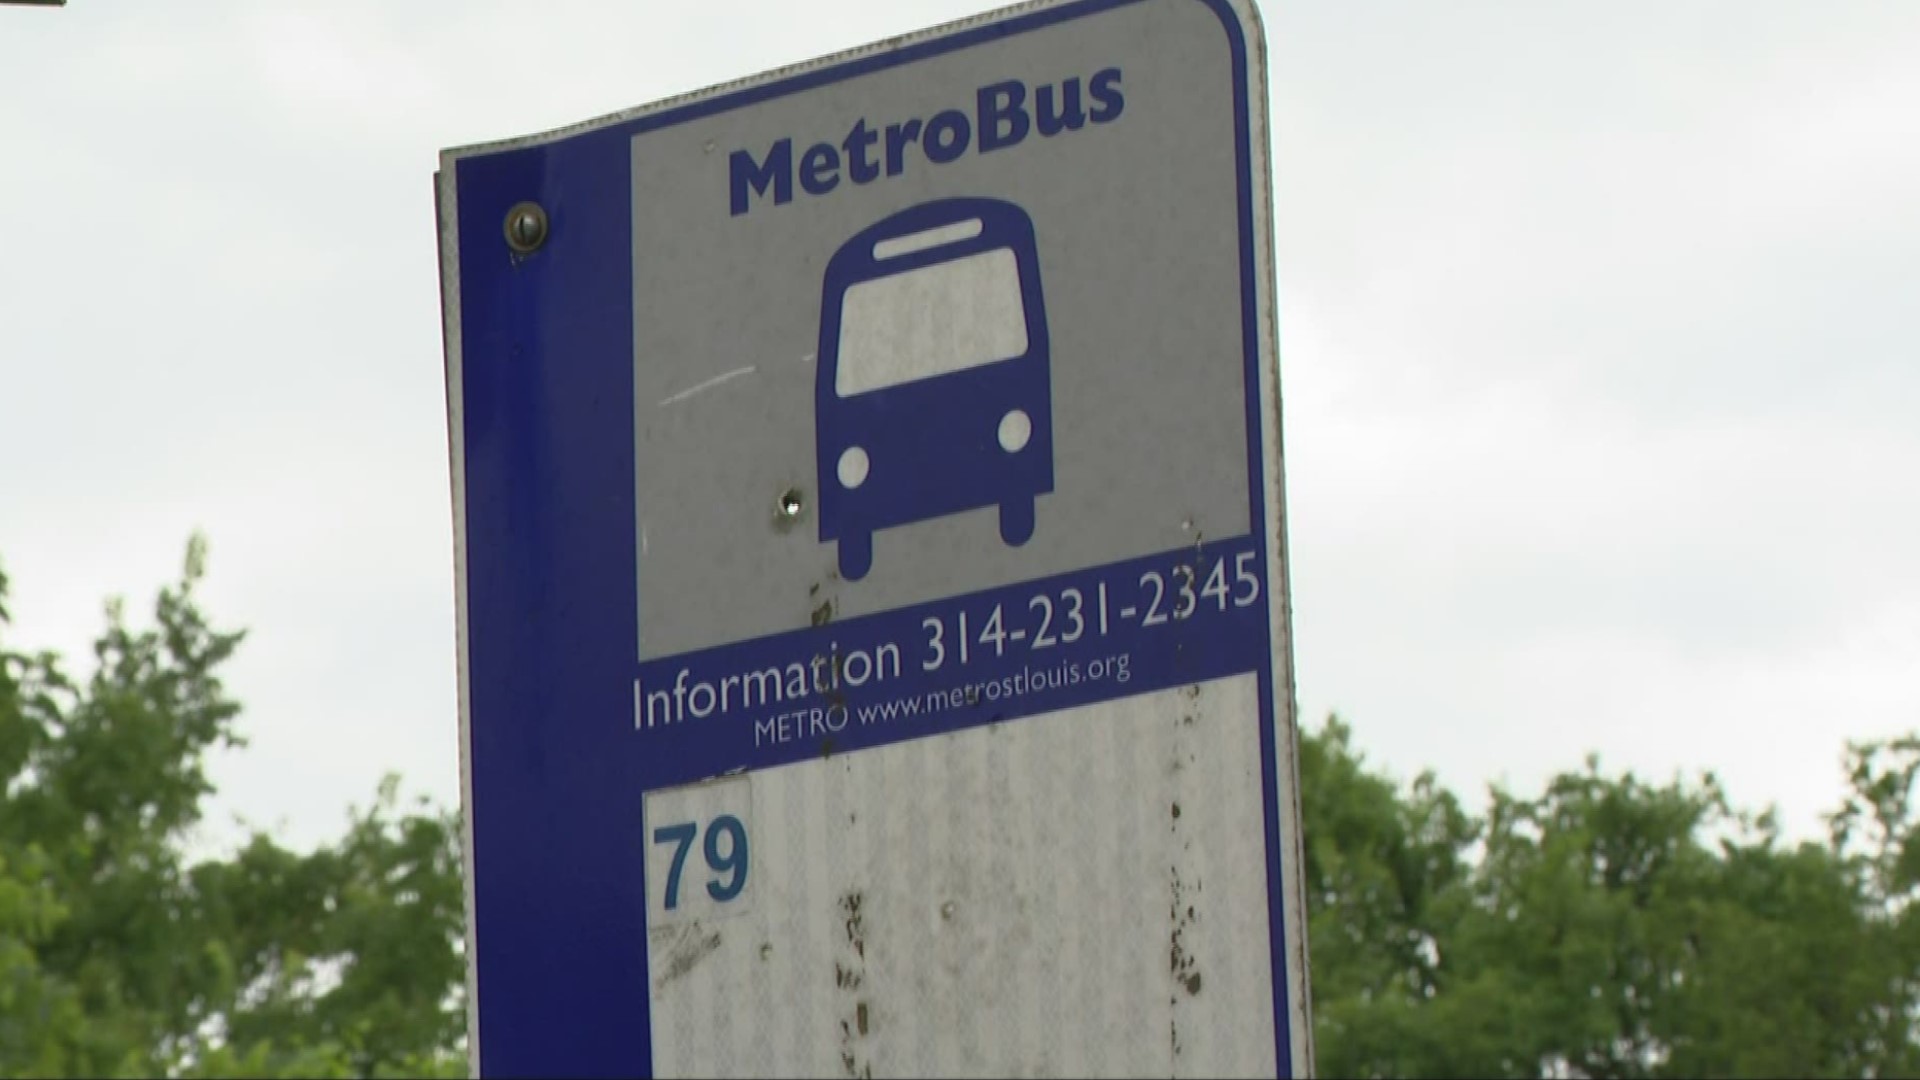 A representative from Metro told 5 On Your Side the initial 450 stops being impacted was reduced after the company re-evaluated following community concerns.